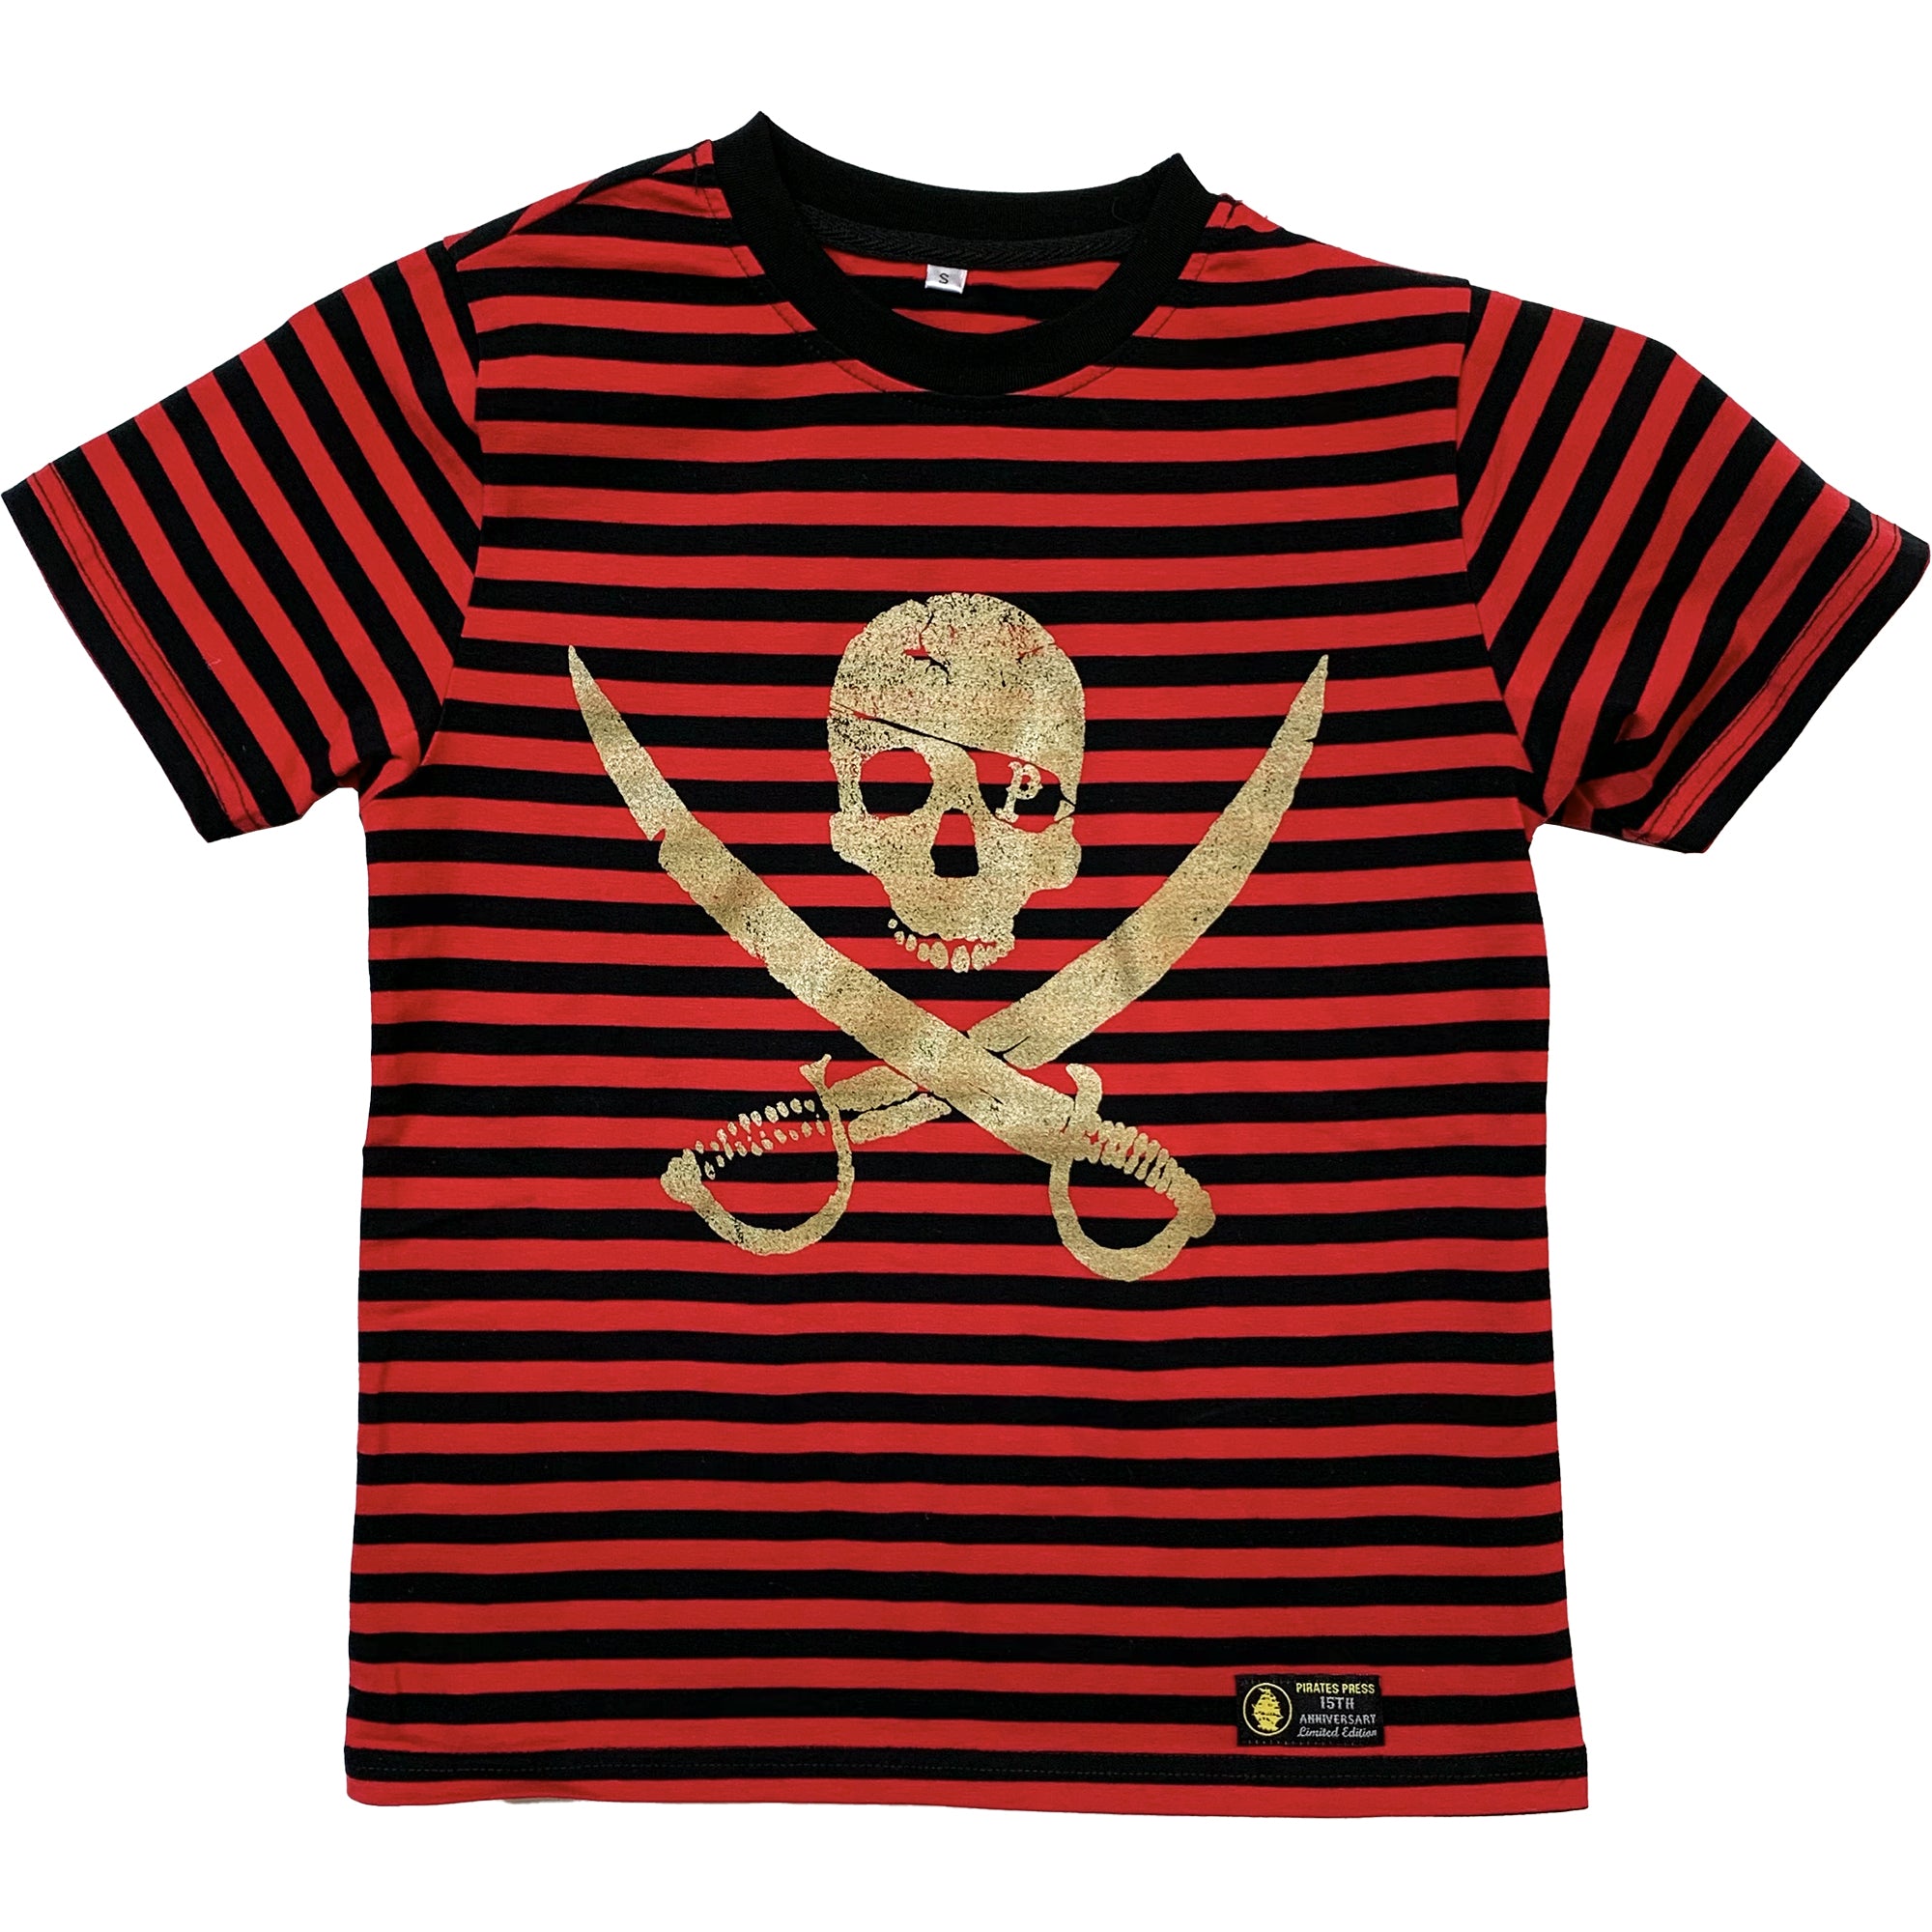 Pirates Press Records - Pirate Logo - Gold on Red & Black Striped  - 15 Year Tag - T-Shirt - Youth